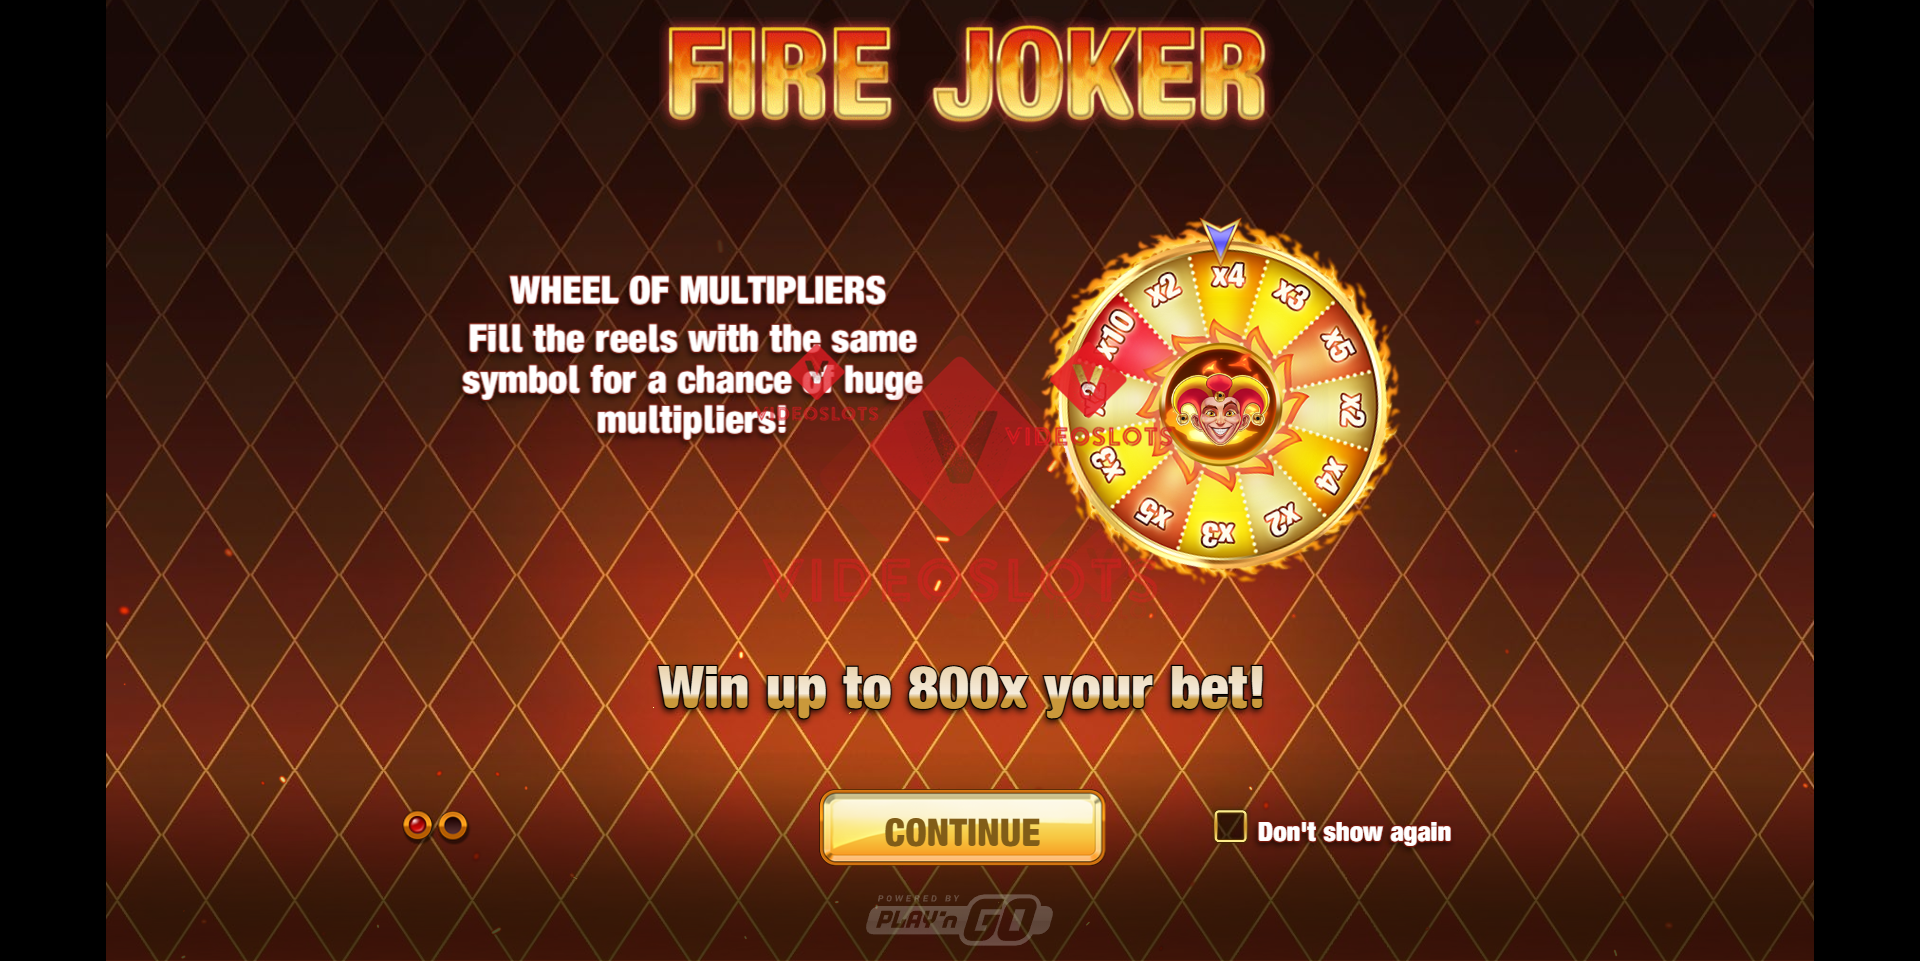 Game Intro for Fire Joker slot from Play'n Go